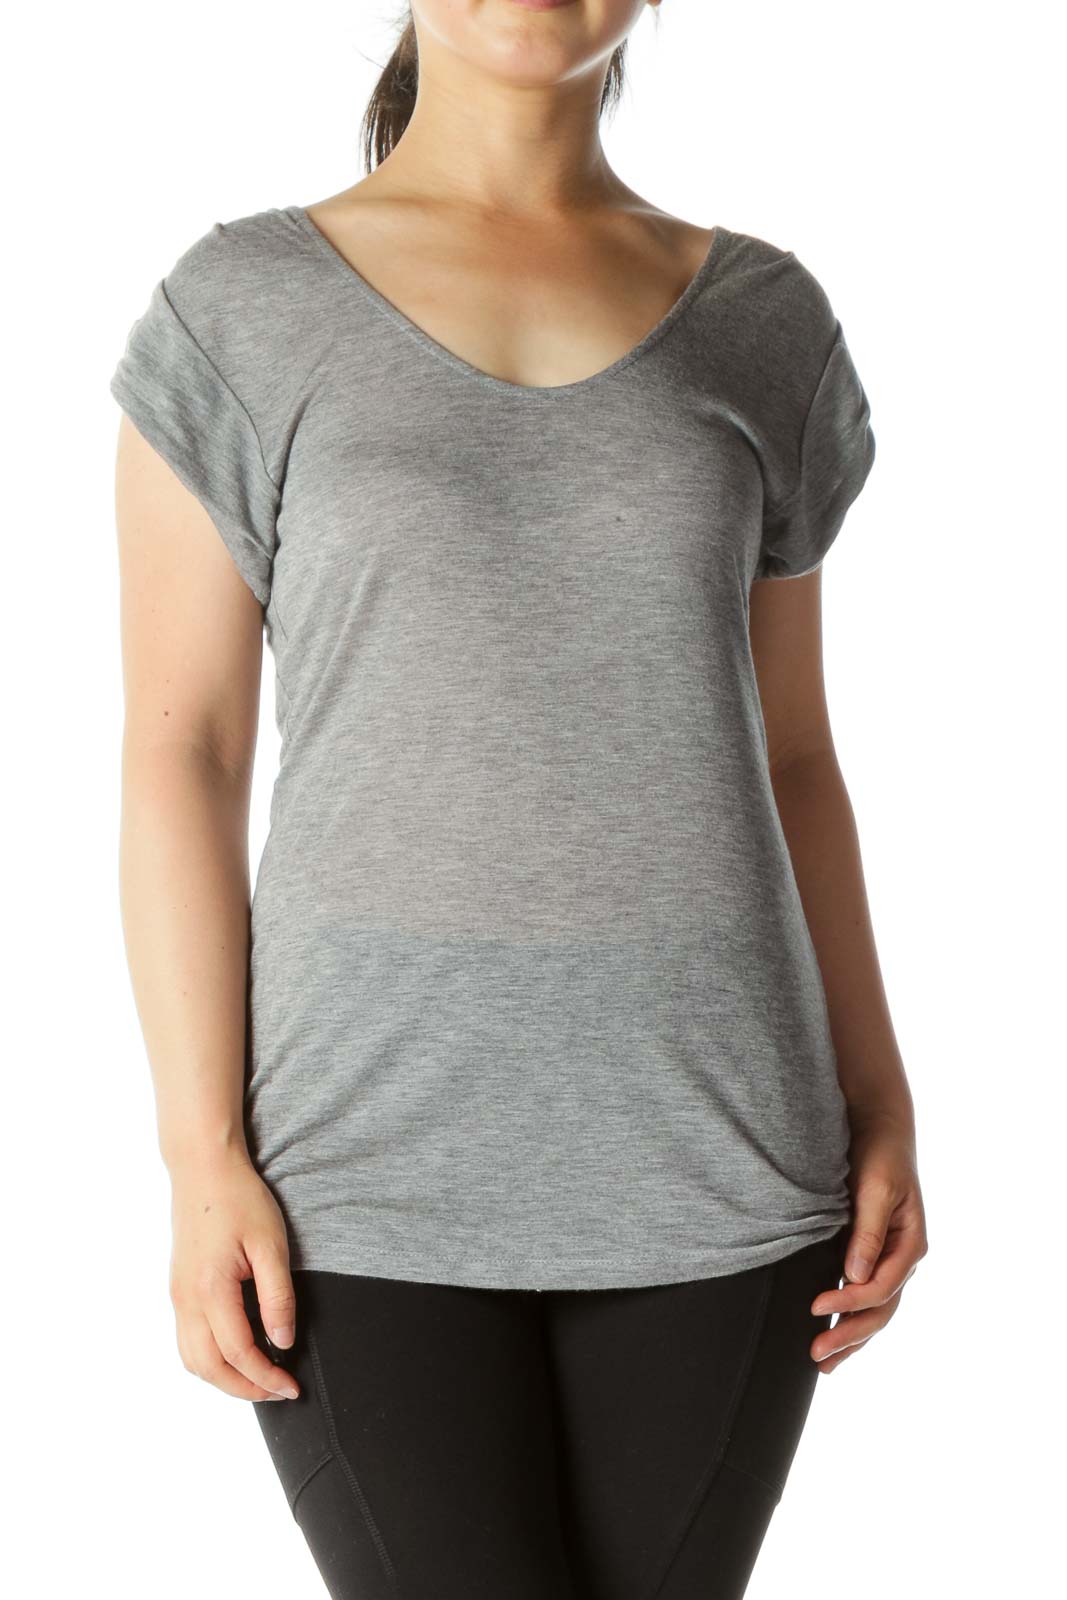 Gray Shirt with Burgundy Stripe on Back Front